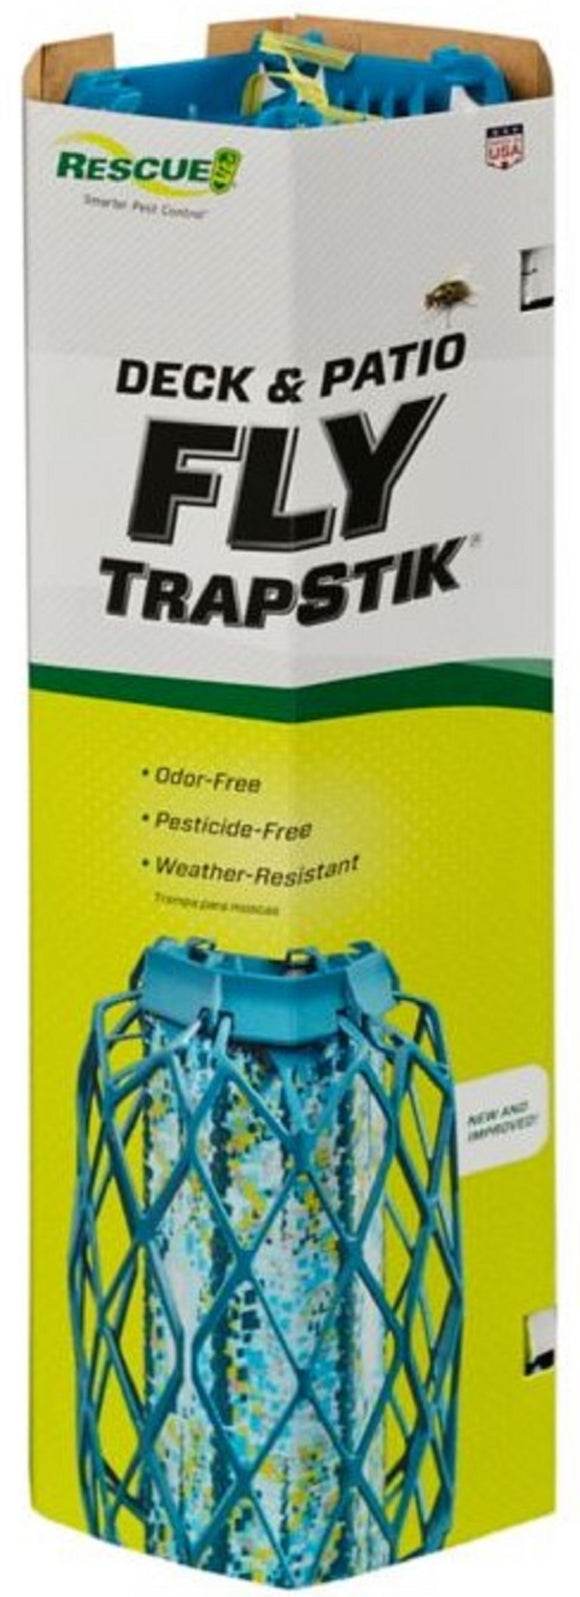 Rescue TSBF-BB6 Deck and Patio Fly TrapStik Reusable